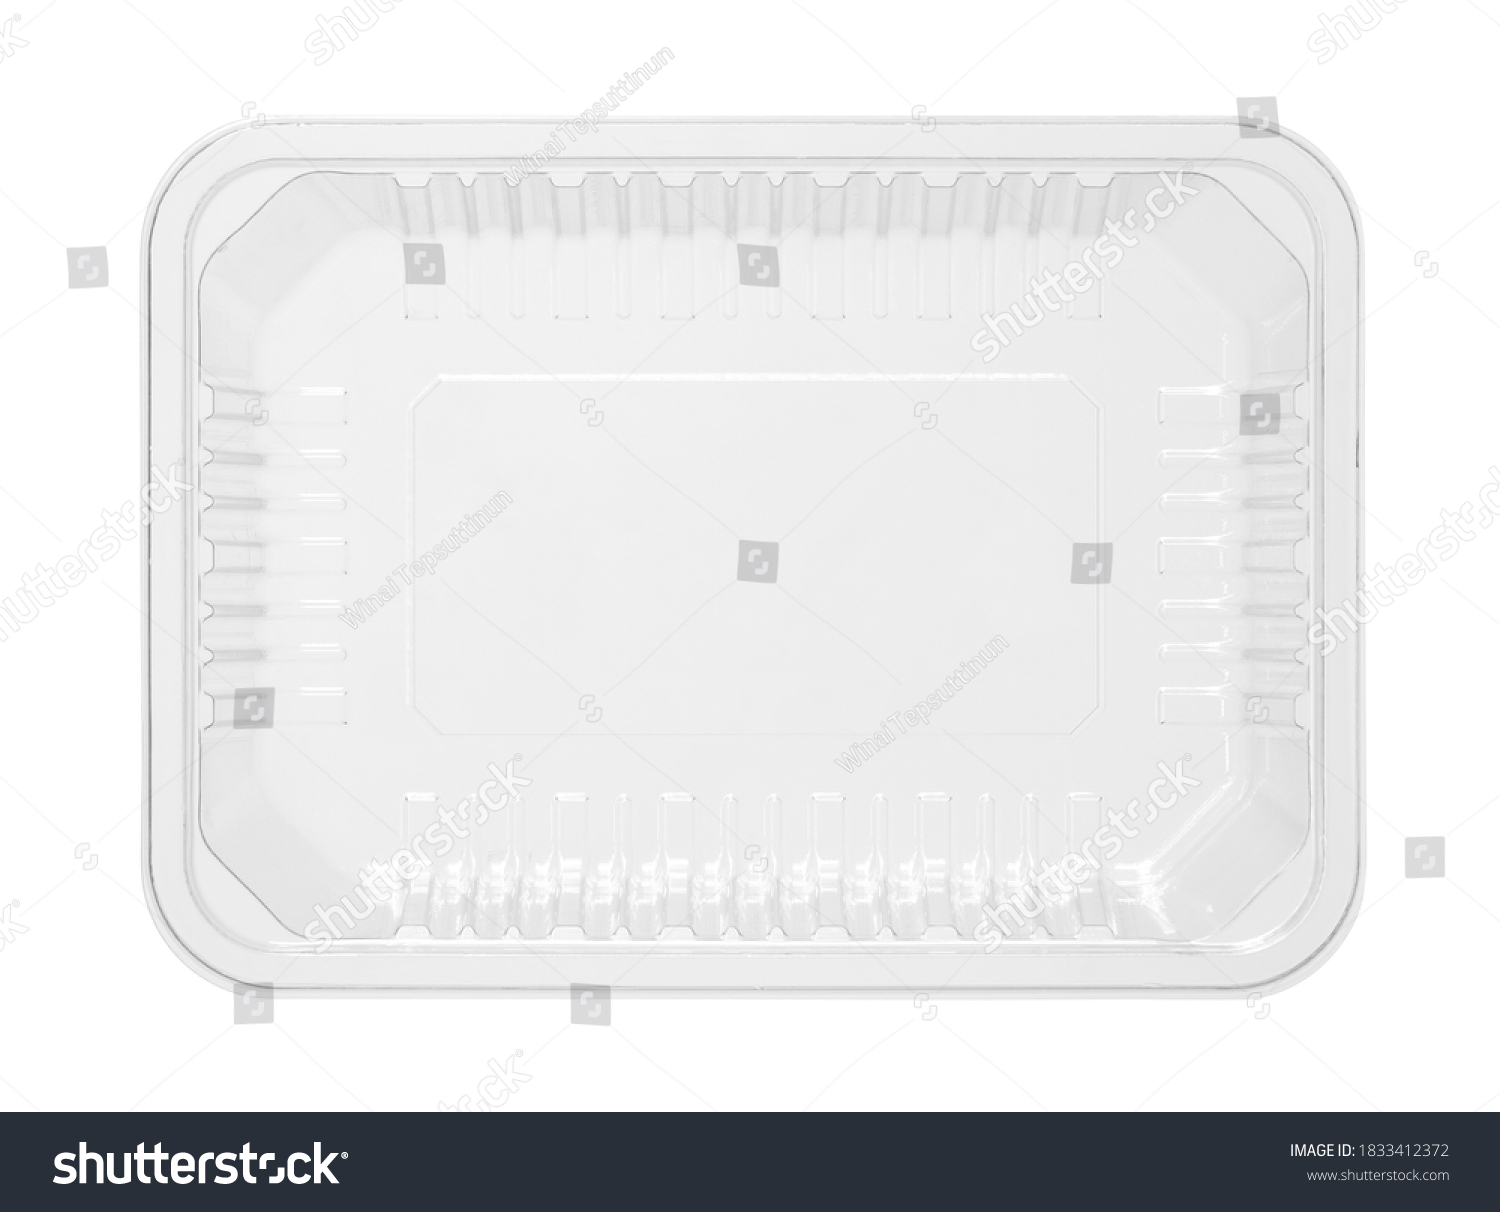 Plastic food box disposable top view (with clipping path) isolated on white background #1833412372